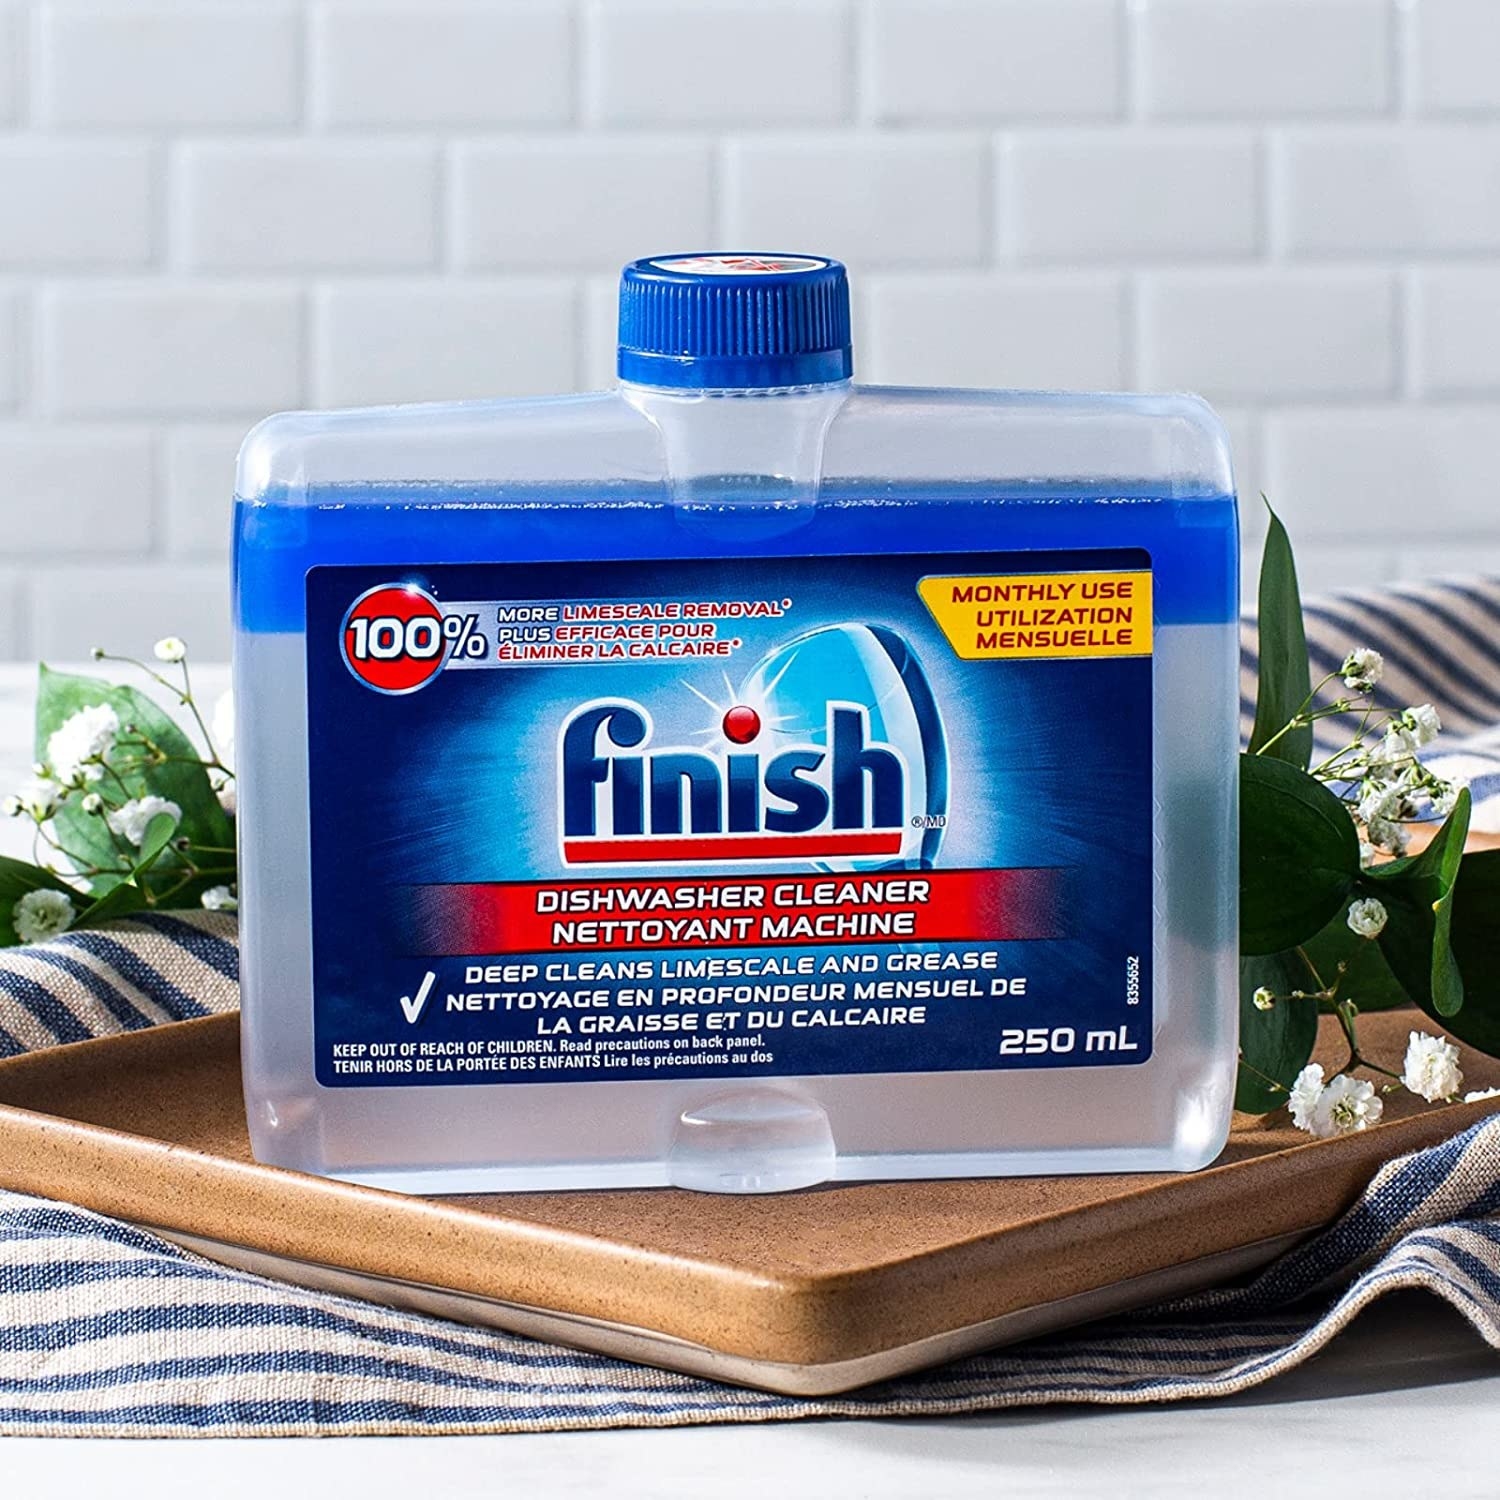 A bottle of dishwasher cleaner on a tray